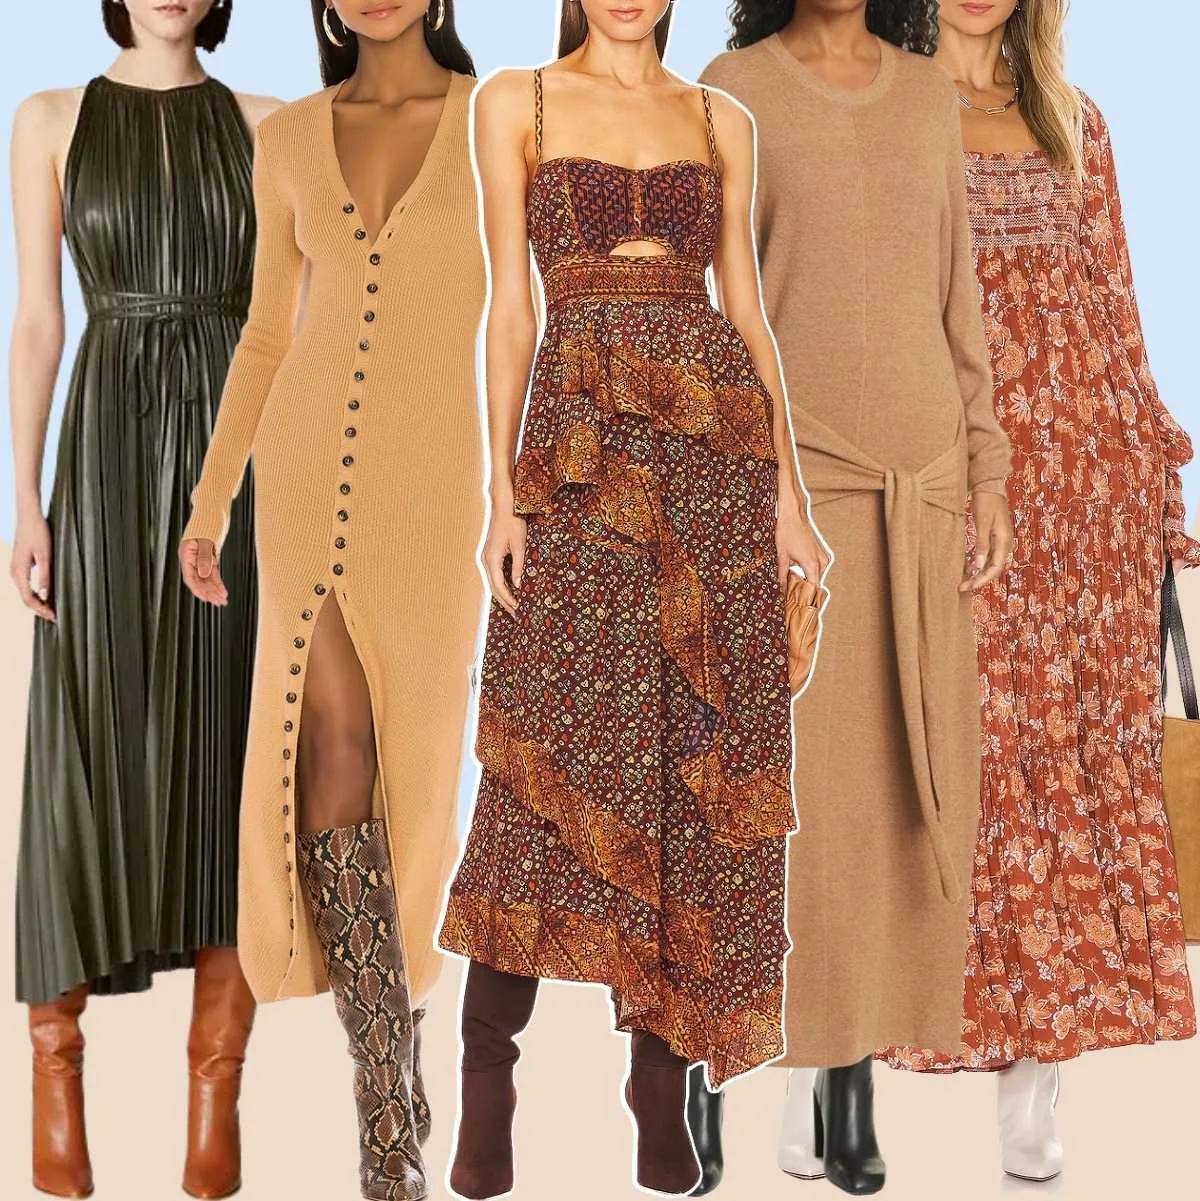 Collage of 5 women different knee boots with maxi dresses.